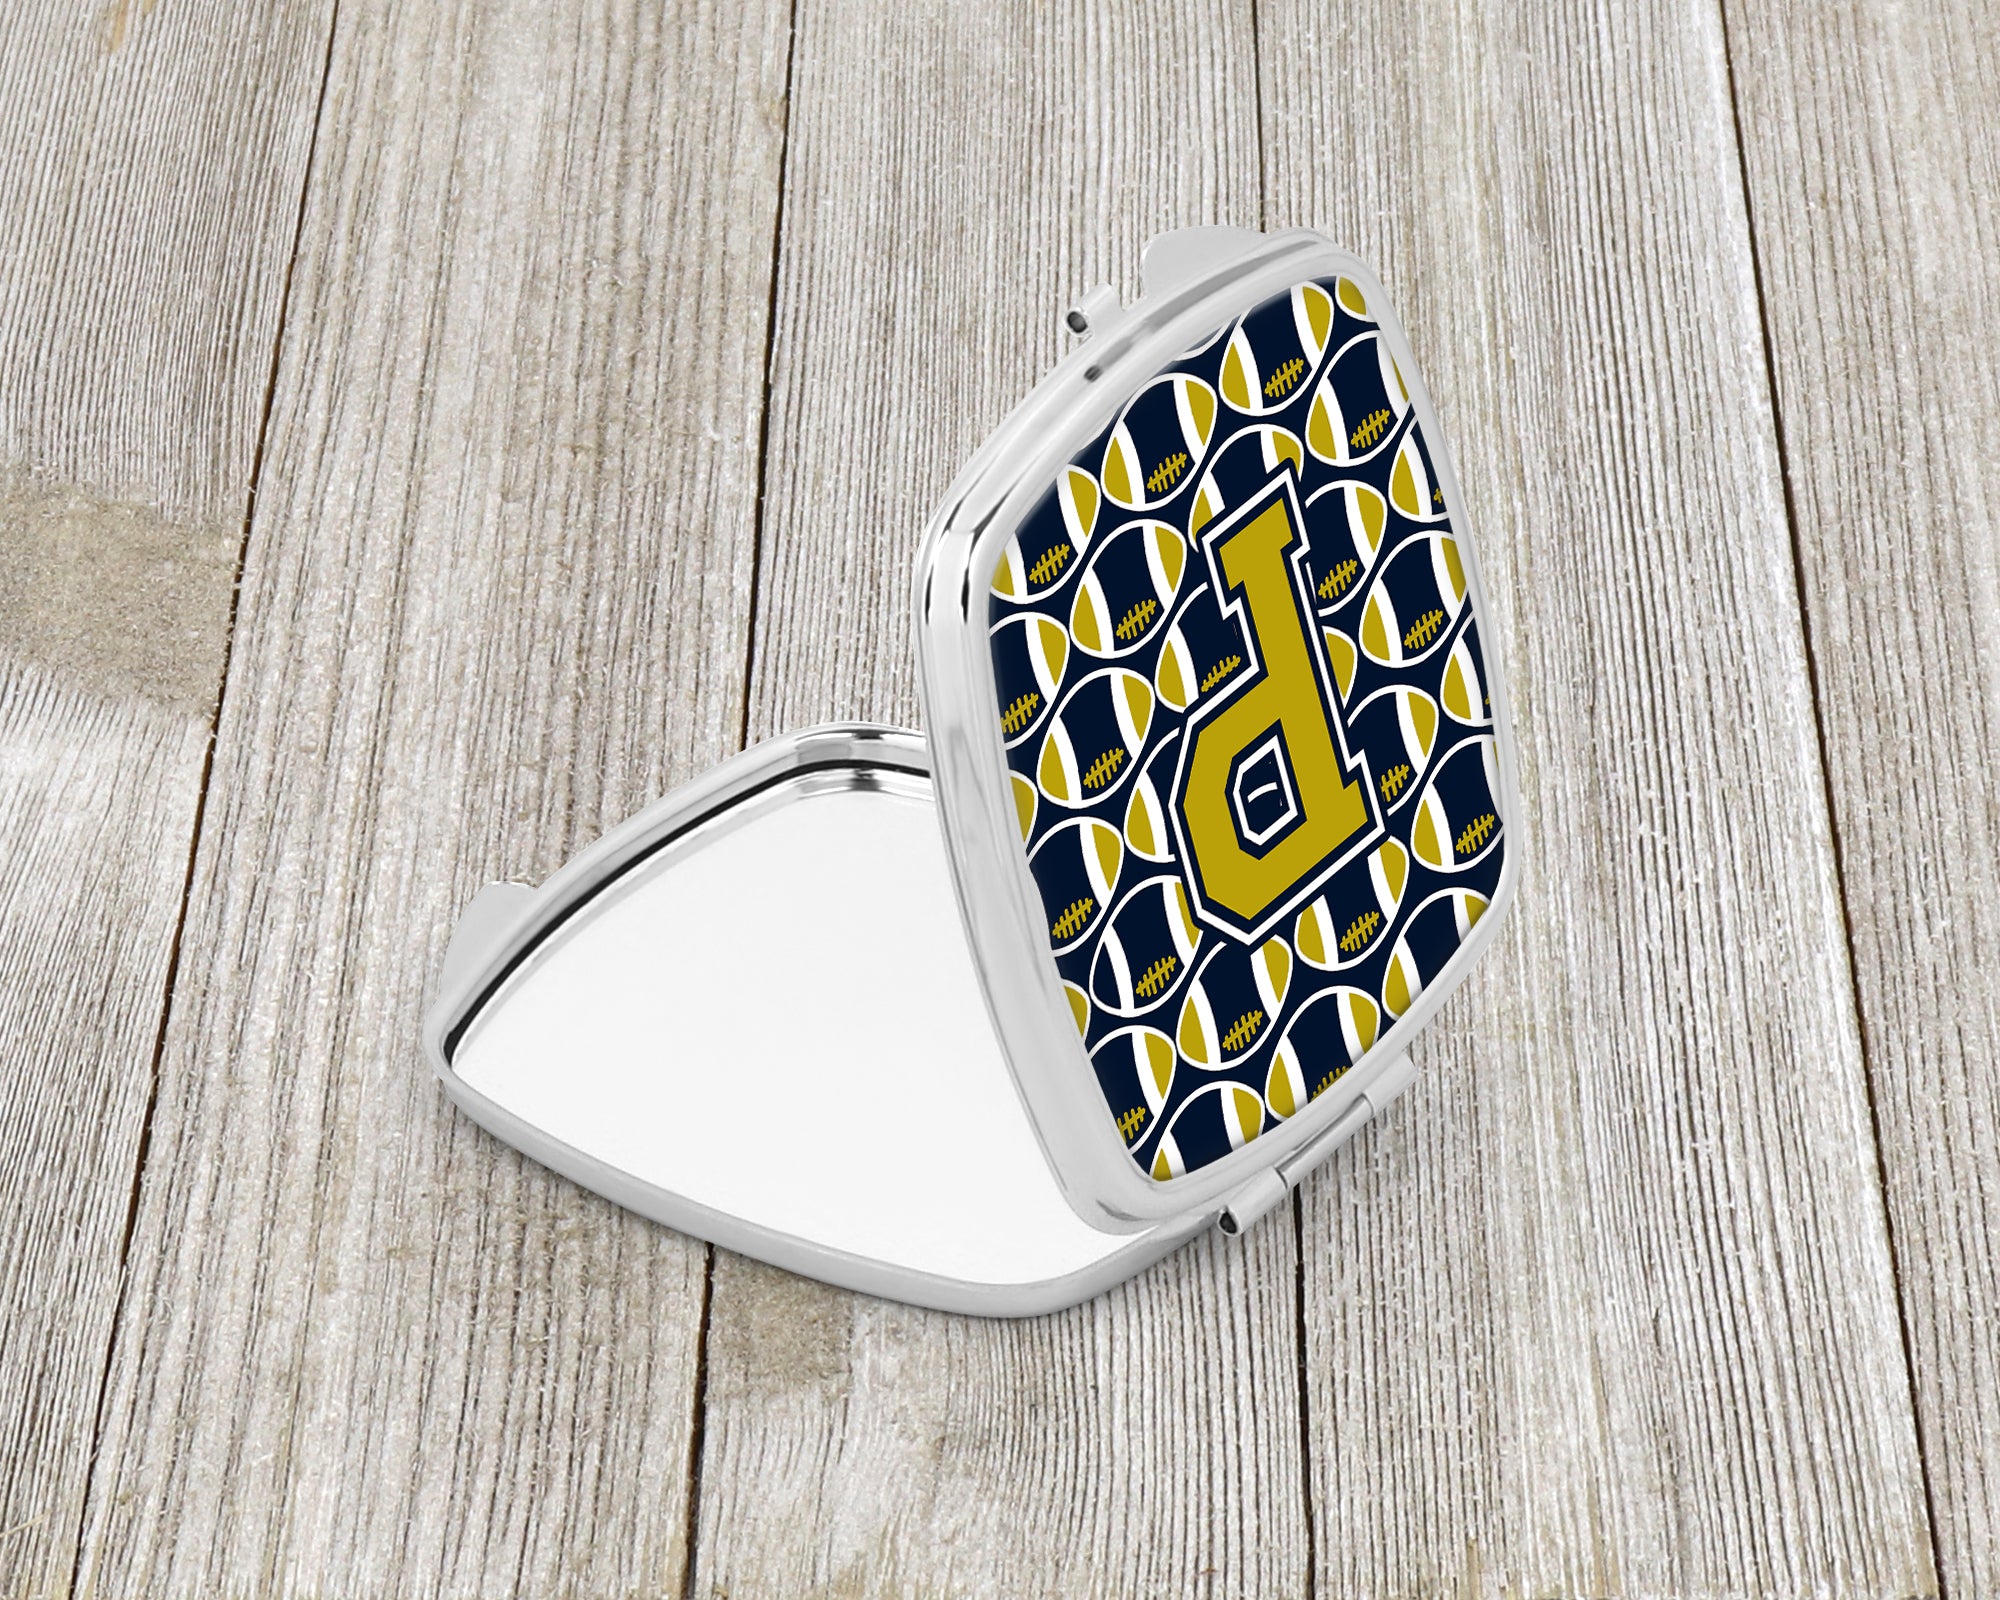 Letter P Football Blue and Gold Compact Mirror CJ1074-PSCM